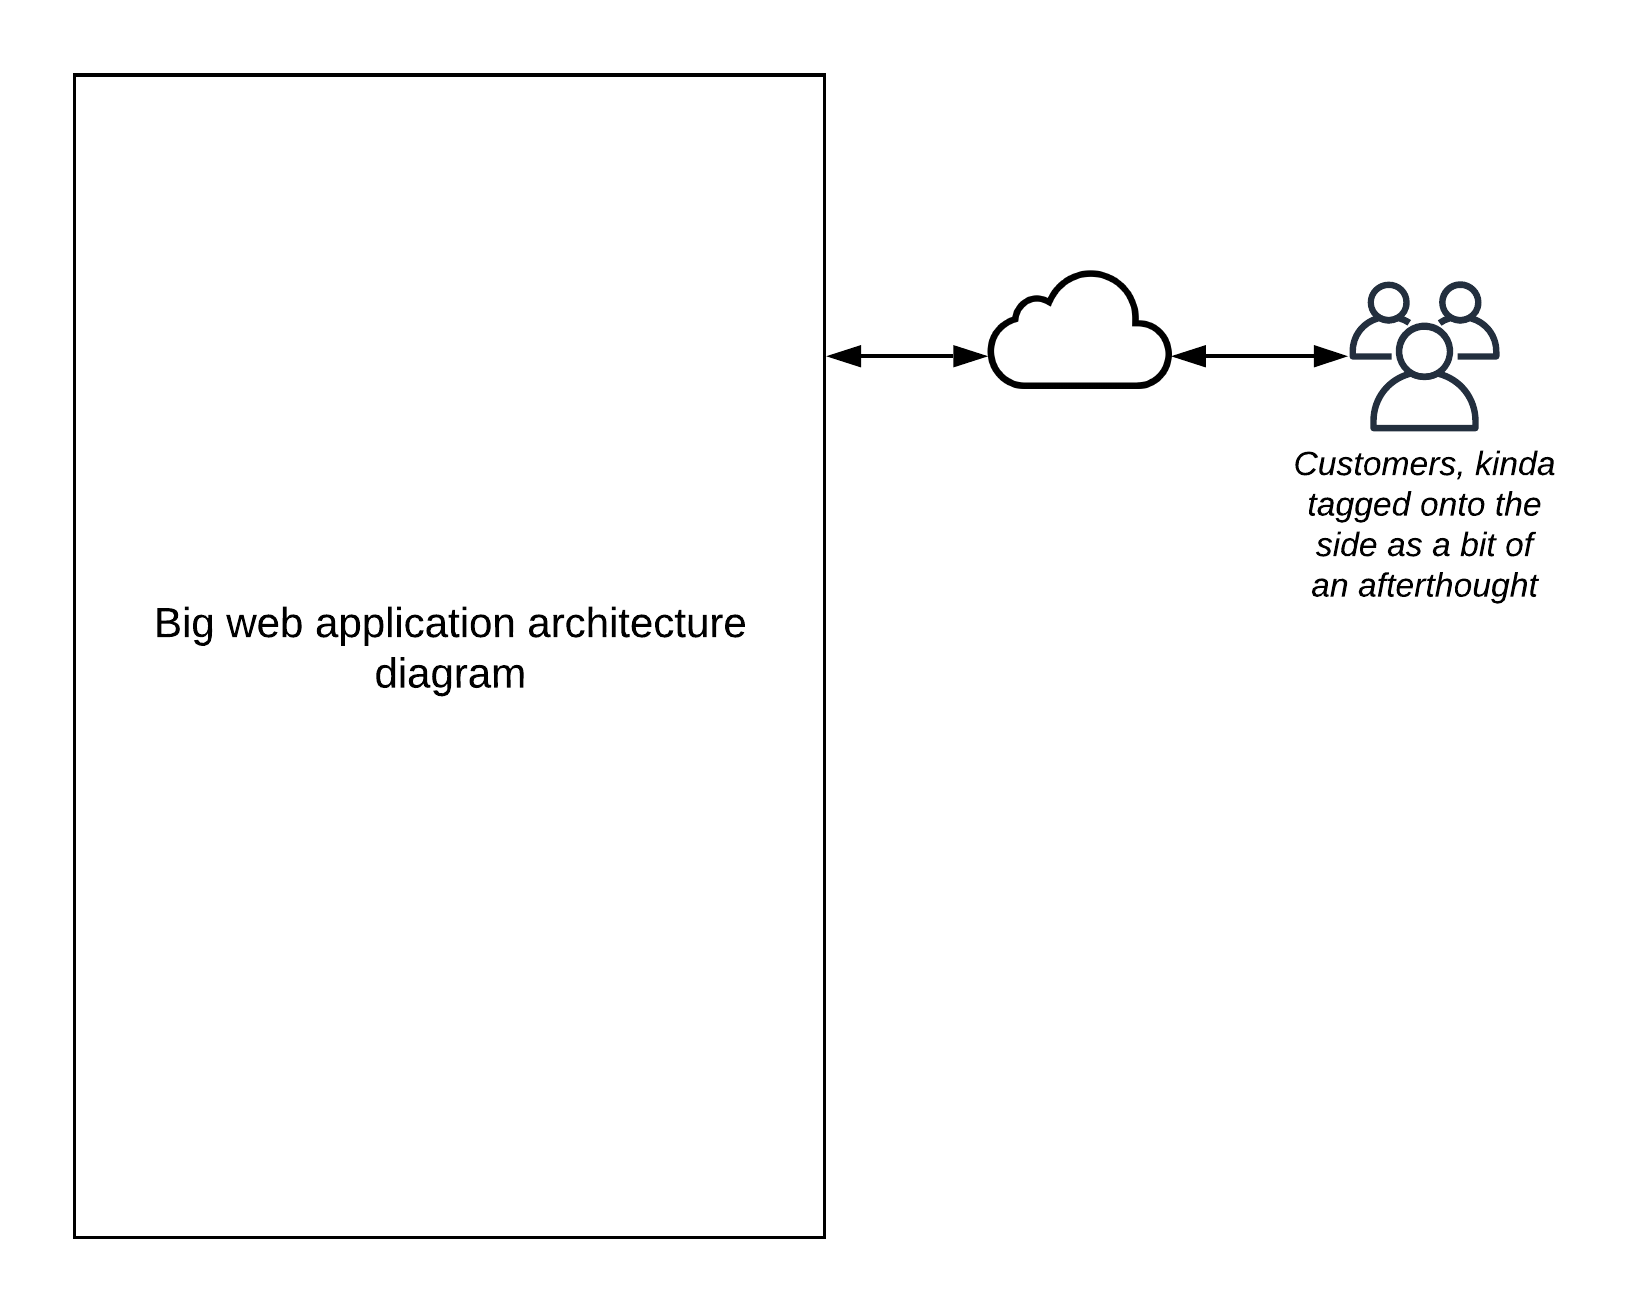 A big web application architecture diagram with a cloud icon connecting to some customers over on the far side as a kind of afterthought